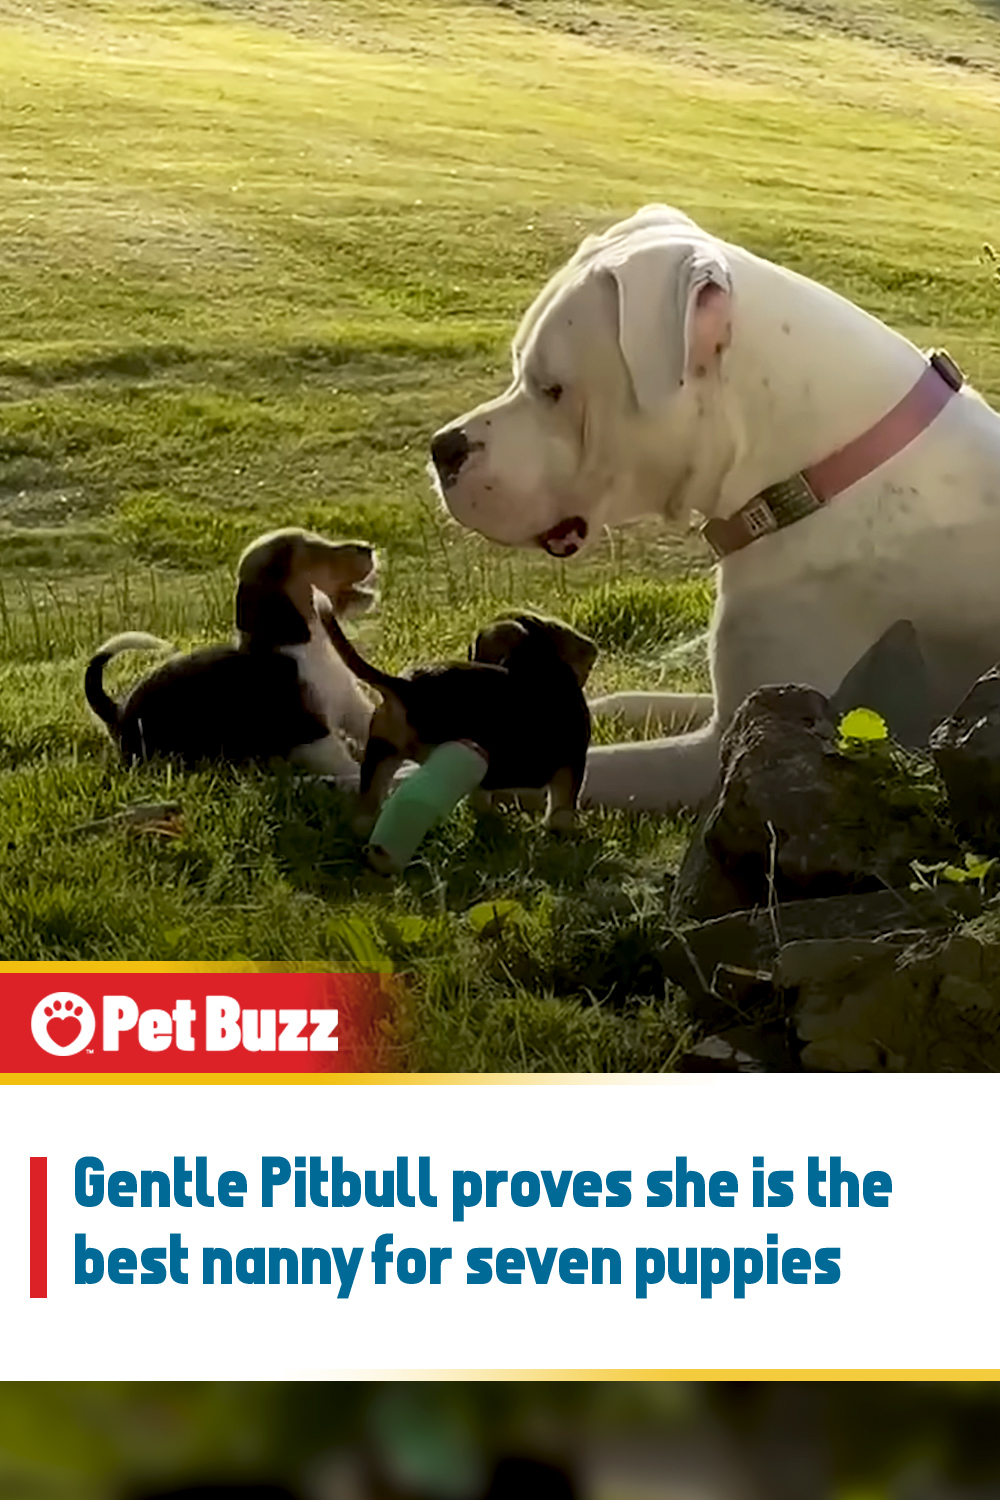 Gentle Pitbull proves she is the best nanny for seven puppies